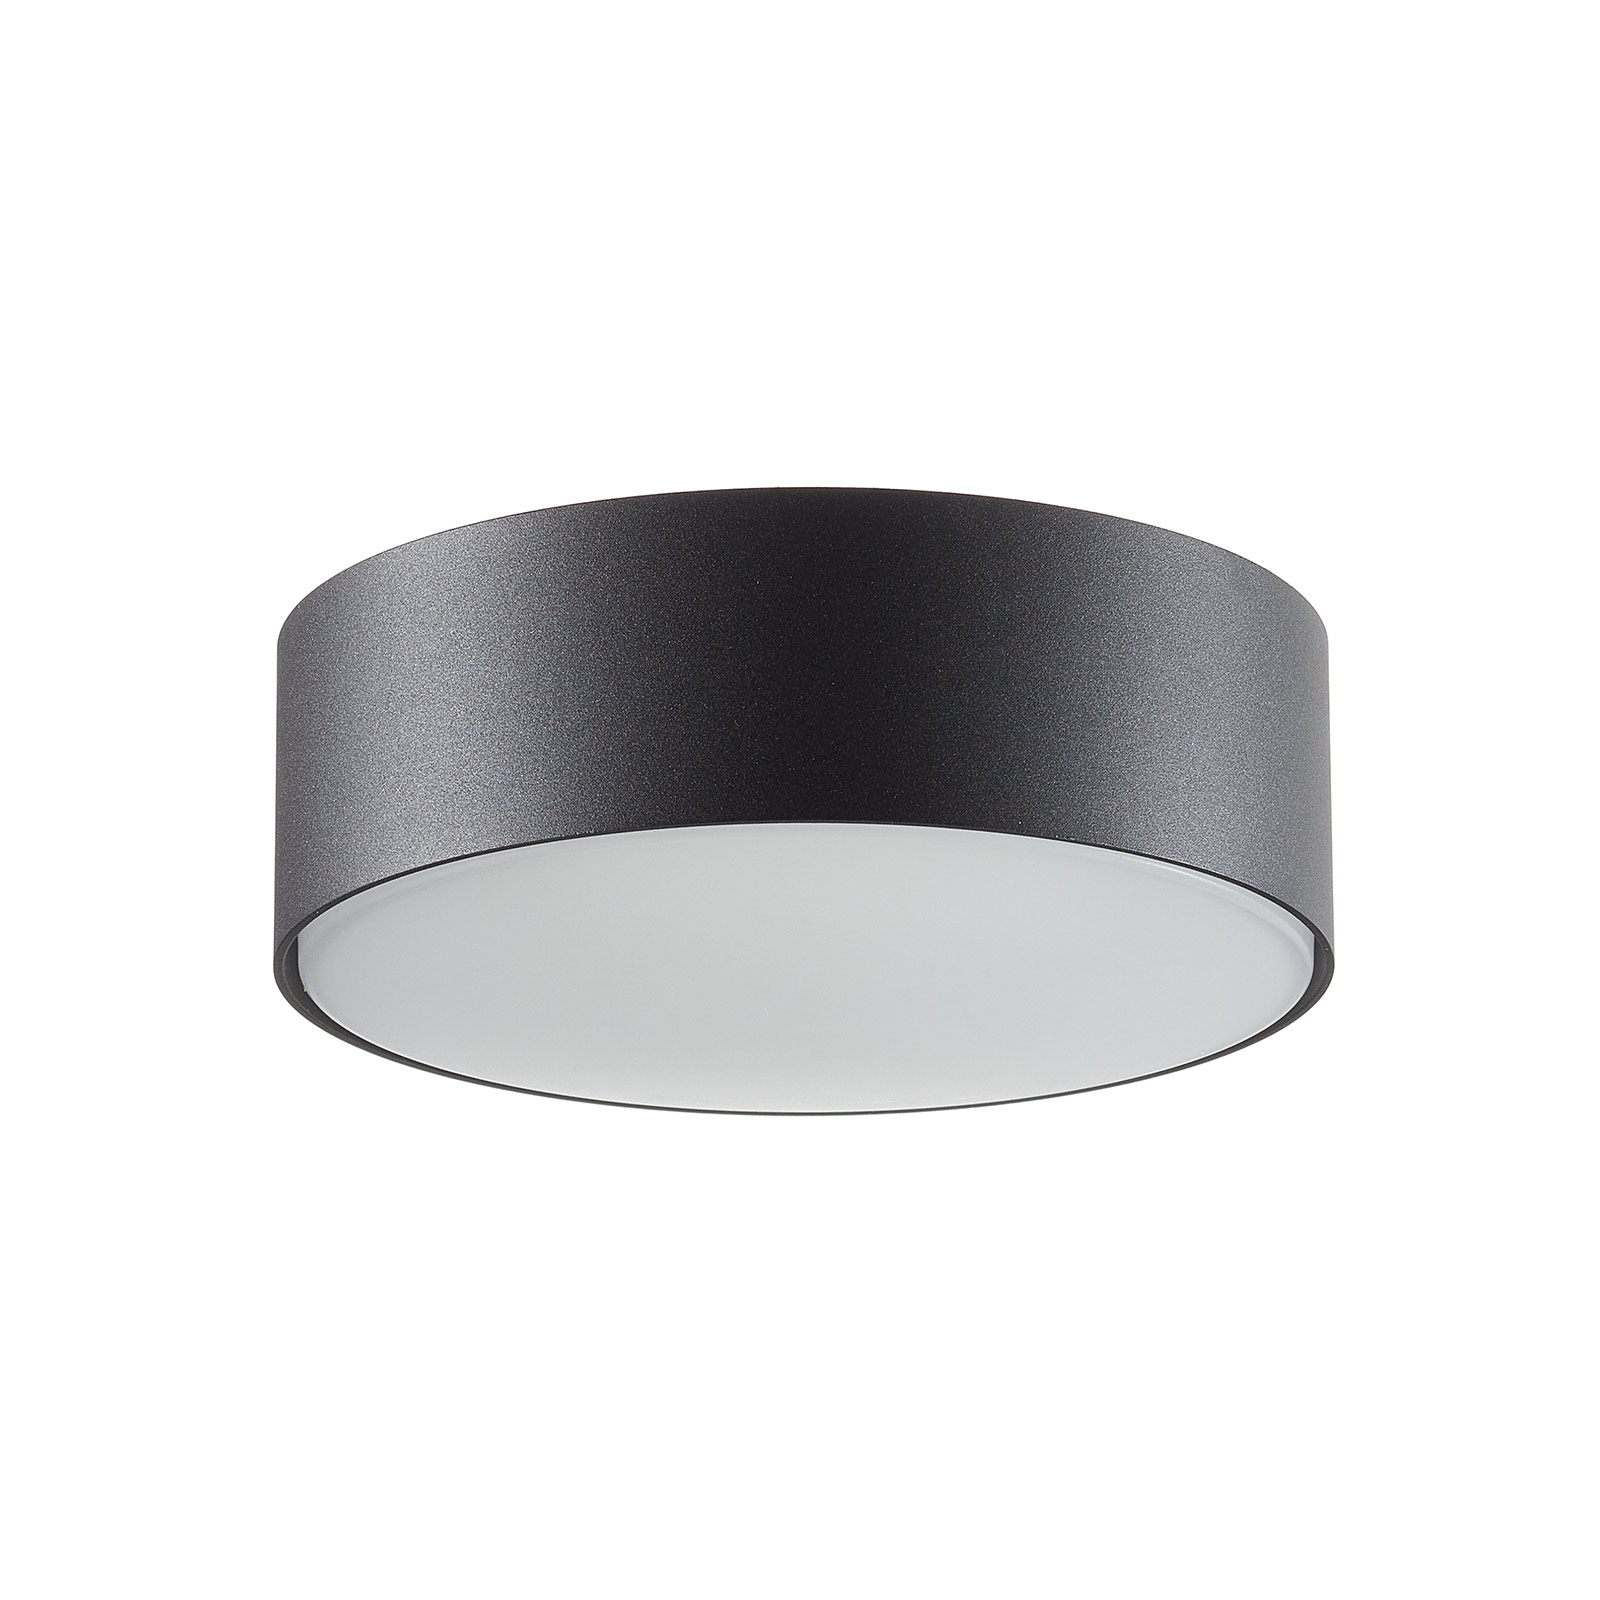 WEVER &amp; DUCRÉ Roby IP44 a soffitto 2.700K 16 cm nero